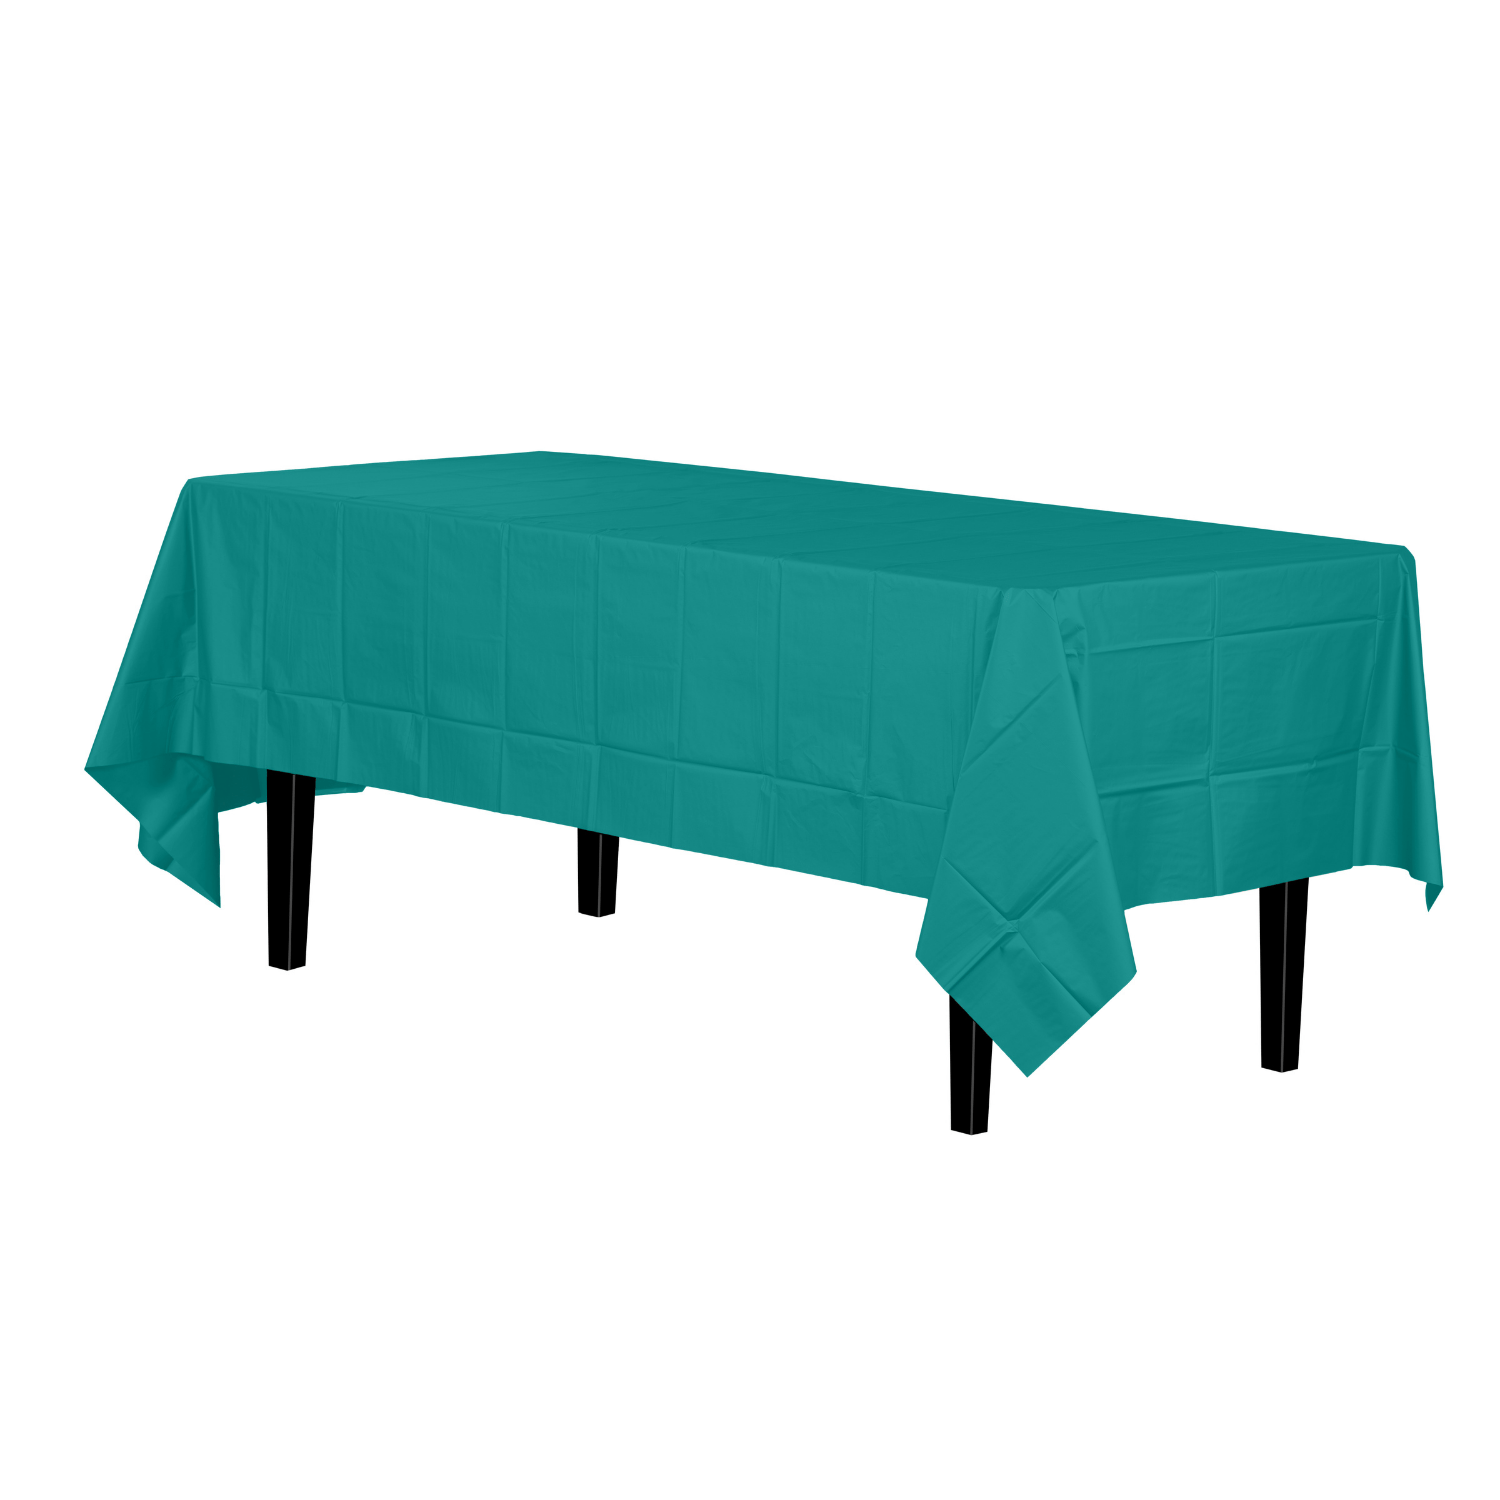 Teal Plastic Tablecloth | 48 Count